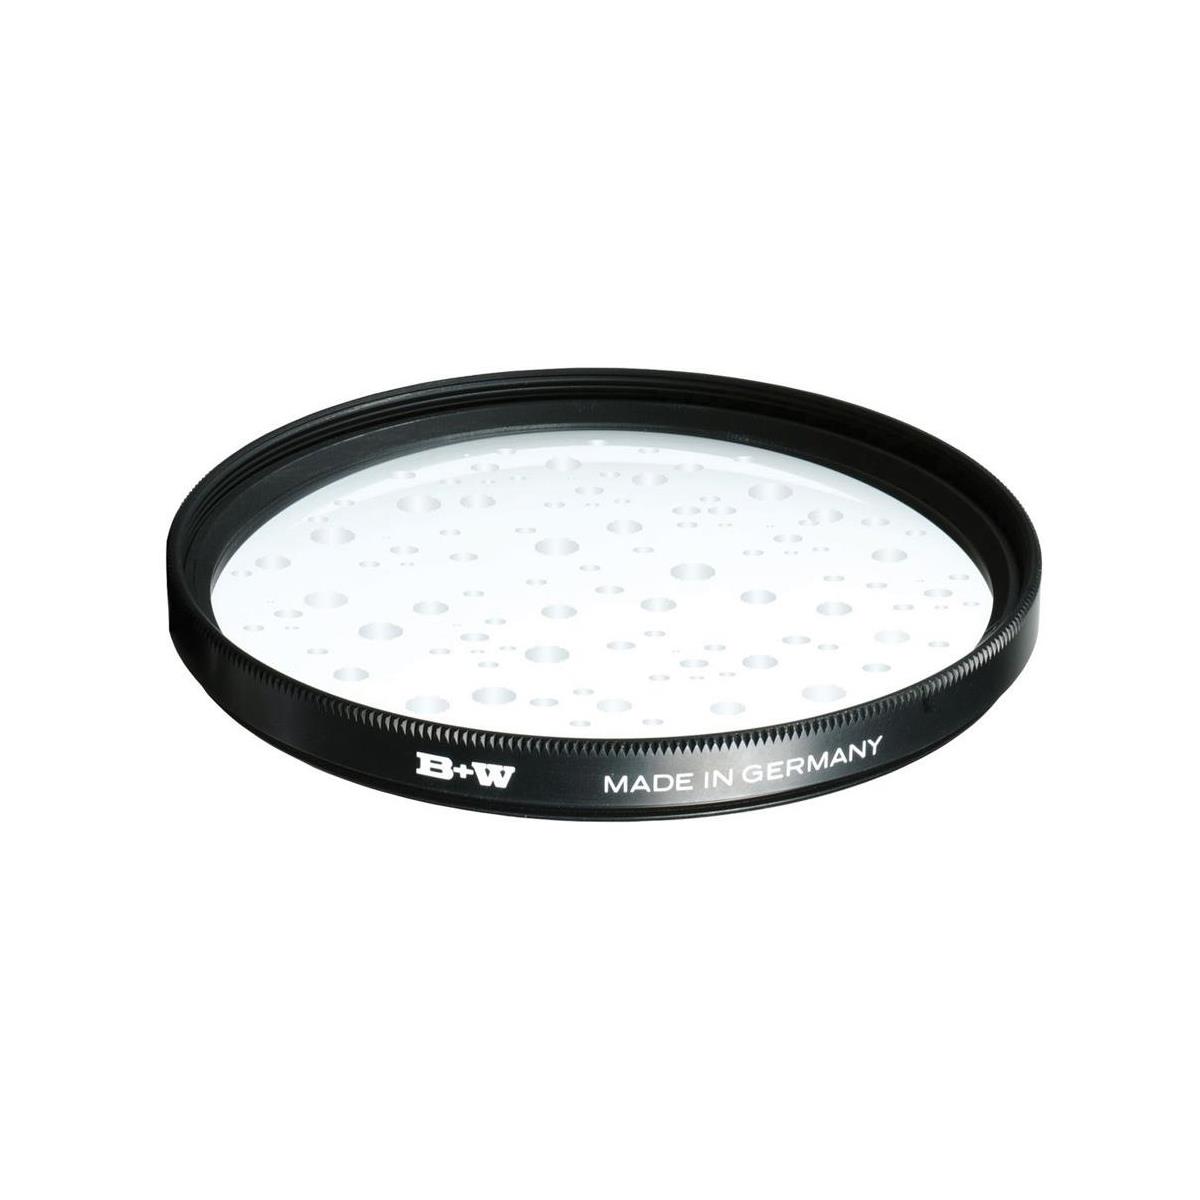 Image of B + W 95mm Soft Pro Filter